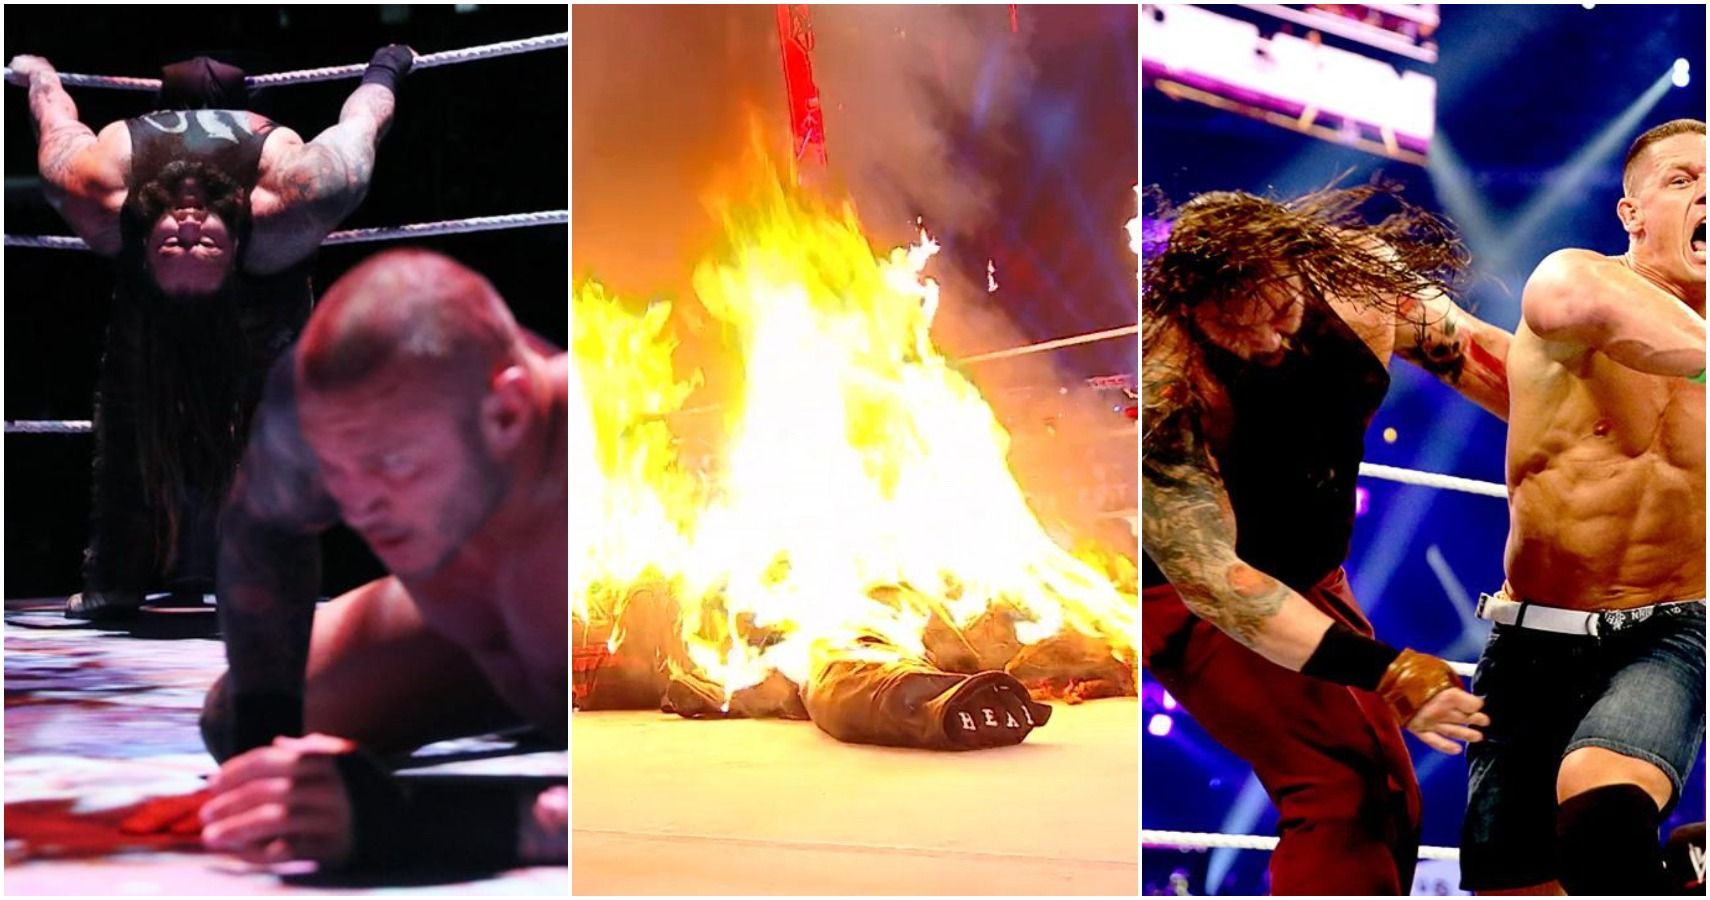 Collage of Bray Wyatt performing a taunt to Randy Orton, The Fiend on fire, and John Cena striking Bray Wyatt